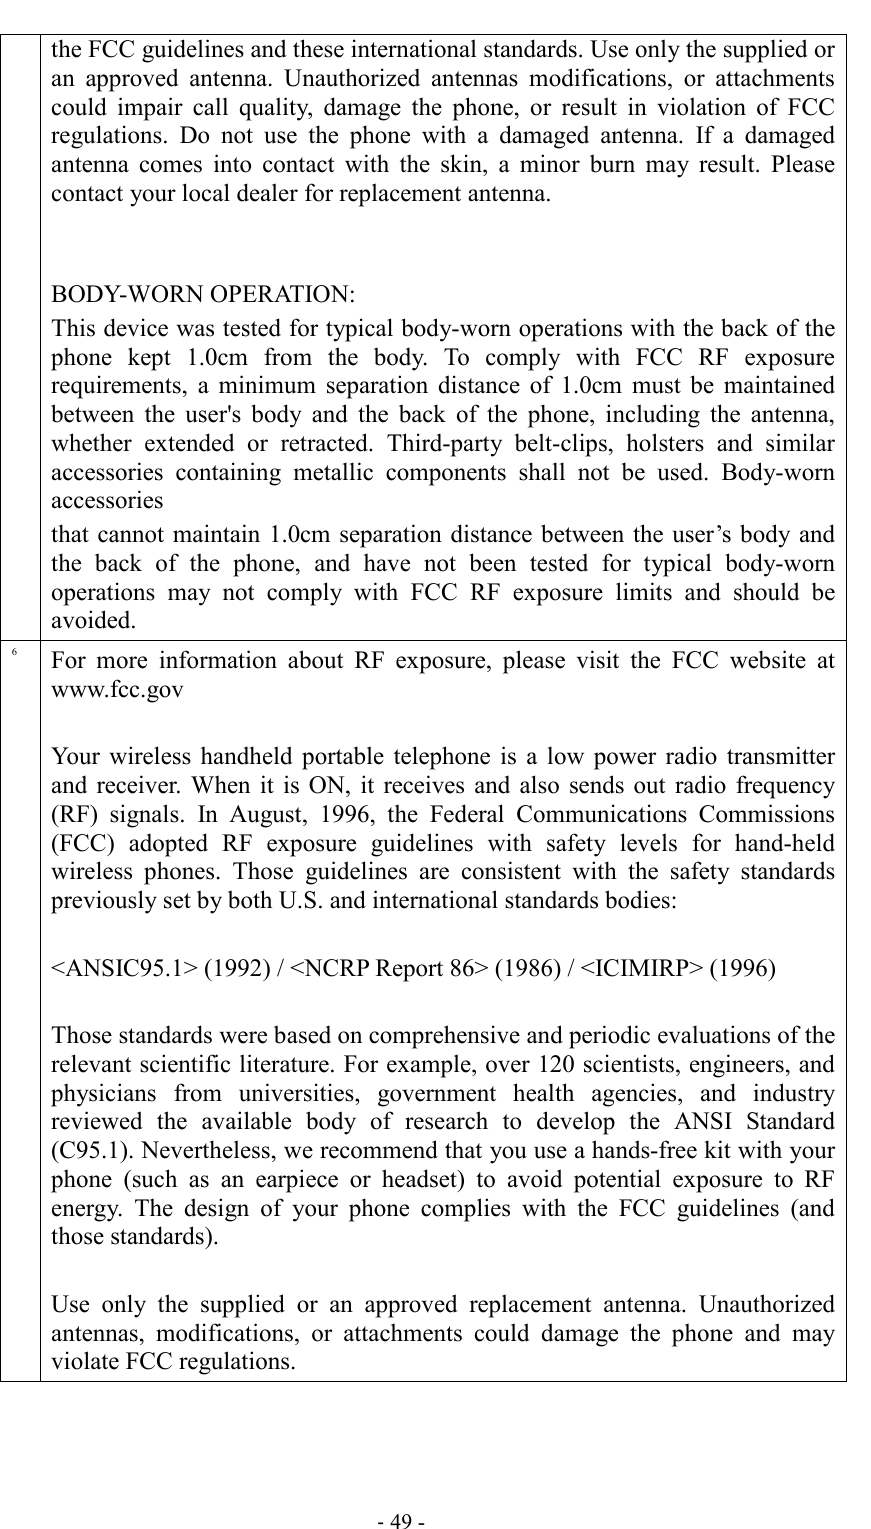                                                                                - 49 - the FCC guidelines and these international standards. Use only the supplied or an  approved  antenna.  Unauthorized  antennas  modifications,  or  attachments could  impair  call  quality,  damage  the  phone,  or  result  in  violation  of  FCC regulations.  Do  not  use  the  phone  with  a  damaged  antenna.  If  a  damaged antenna  comes  into  contact  with  the  skin,  a  minor  burn  may  result.  Please contact your local dealer for replacement antenna.   BODY-WORN OPERATION: This device was tested for typical body-worn operations with the back of the phone  kept  1.0cm  from  the  body.  To  comply  with  FCC  RF  exposure requirements,  a  minimum  separation  distance  of  1.0cm  must  be  maintained between  the  user&apos;s  body  and  the  back  of  the  phone,  including  the  antenna, whether  extended  or  retracted.  Third-party  belt-clips,  holsters  and  similar accessories  containing  metallic  components  shall  not  be  used.  Body-worn accessories that cannot maintain 1.0cm separation distance between the user’s body and the  back  of  the  phone,  and  have  not  been  tested  for  typical  body-worn operations  may  not  comply  with  FCC  RF  exposure  limits  and  should  be avoided. 6 For  more  information  about  RF  exposure,  please  visit  the  FCC  website  at www.fcc.gov  Your  wireless  handheld  portable  telephone is  a  low  power radio  transmitter and  receiver.  When  it  is ON,  it  receives  and  also  sends  out  radio  frequency (RF)  signals.  In  August,  1996,  the  Federal  Communications  Commissions (FCC)  adopted  RF  exposure  guidelines  with  safety  levels  for  hand-held wireless  phones.  Those  guidelines  are  consistent  with  the  safety  standards previously set by both U.S. and international standards bodies:  &lt;ANSIC95.1&gt; (1992) / &lt;NCRP Report 86&gt; (1986) / &lt;ICIMIRP&gt; (1996)  Those standards were based on comprehensive and periodic evaluations of the relevant scientific literature. For example, over 120 scientists, engineers, and physicians  from  universities,  government  health  agencies,  and  industry reviewed  the  available  body  of  research  to  develop  the  ANSI  Standard (C95.1). Nevertheless, we recommend that you use a hands-free kit with your phone  (such  as  an  earpiece  or  headset)  to  avoid  potential  exposure  to  RF energy.  The  design  of  your  phone  complies  with  the  FCC  guidelines  (and those standards).  Use  only  the  supplied  or  an  approved  replacement  antenna.  Unauthorized antennas,  modifications,  or  attachments  could  damage  the  phone  and  may violate FCC regulations.  